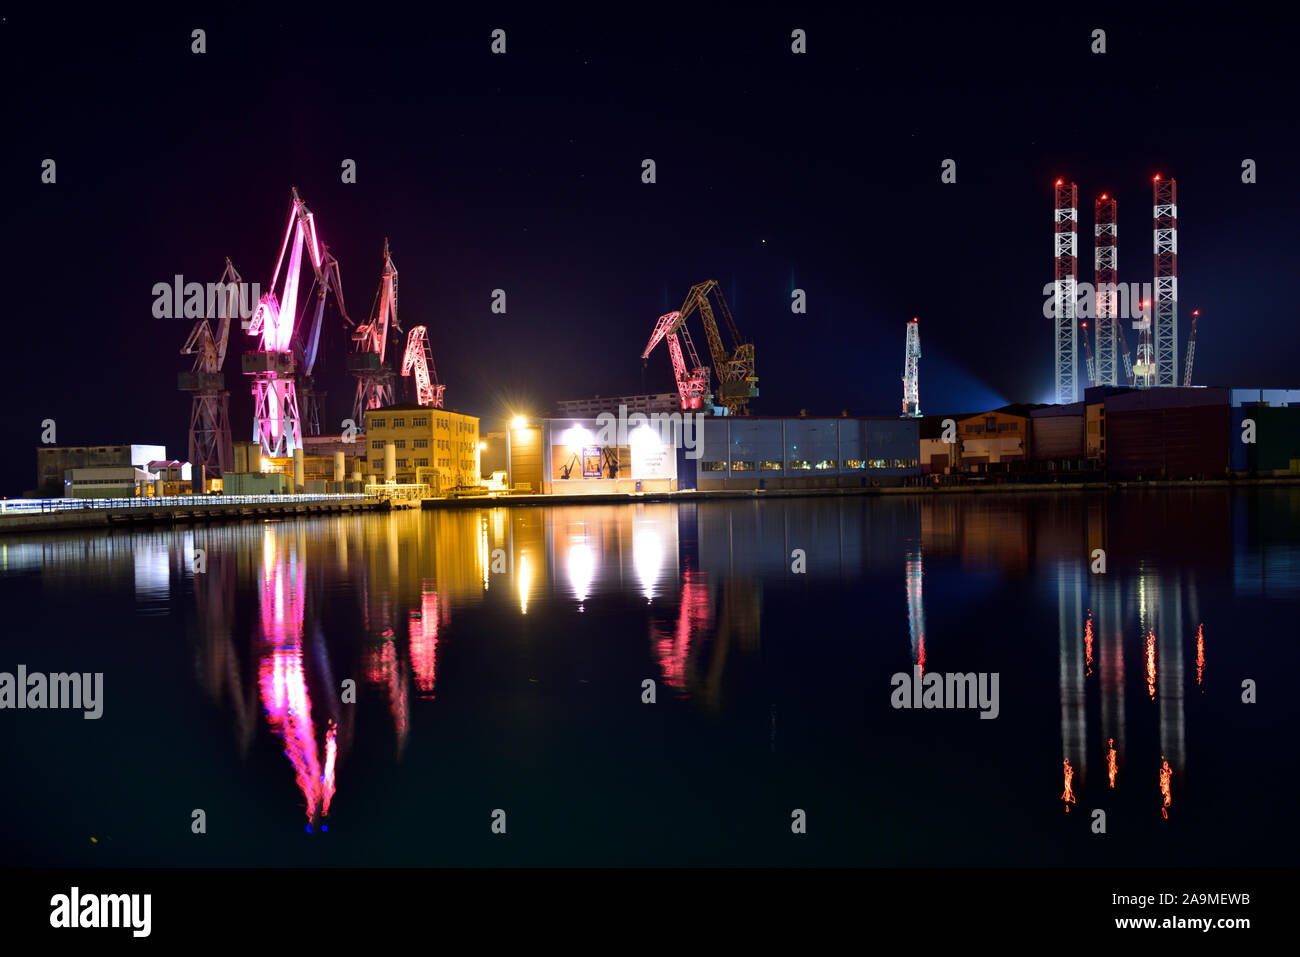 Night time view of colourful lights on shipyard cranes in Pula harbour, Croatia Stock Photo